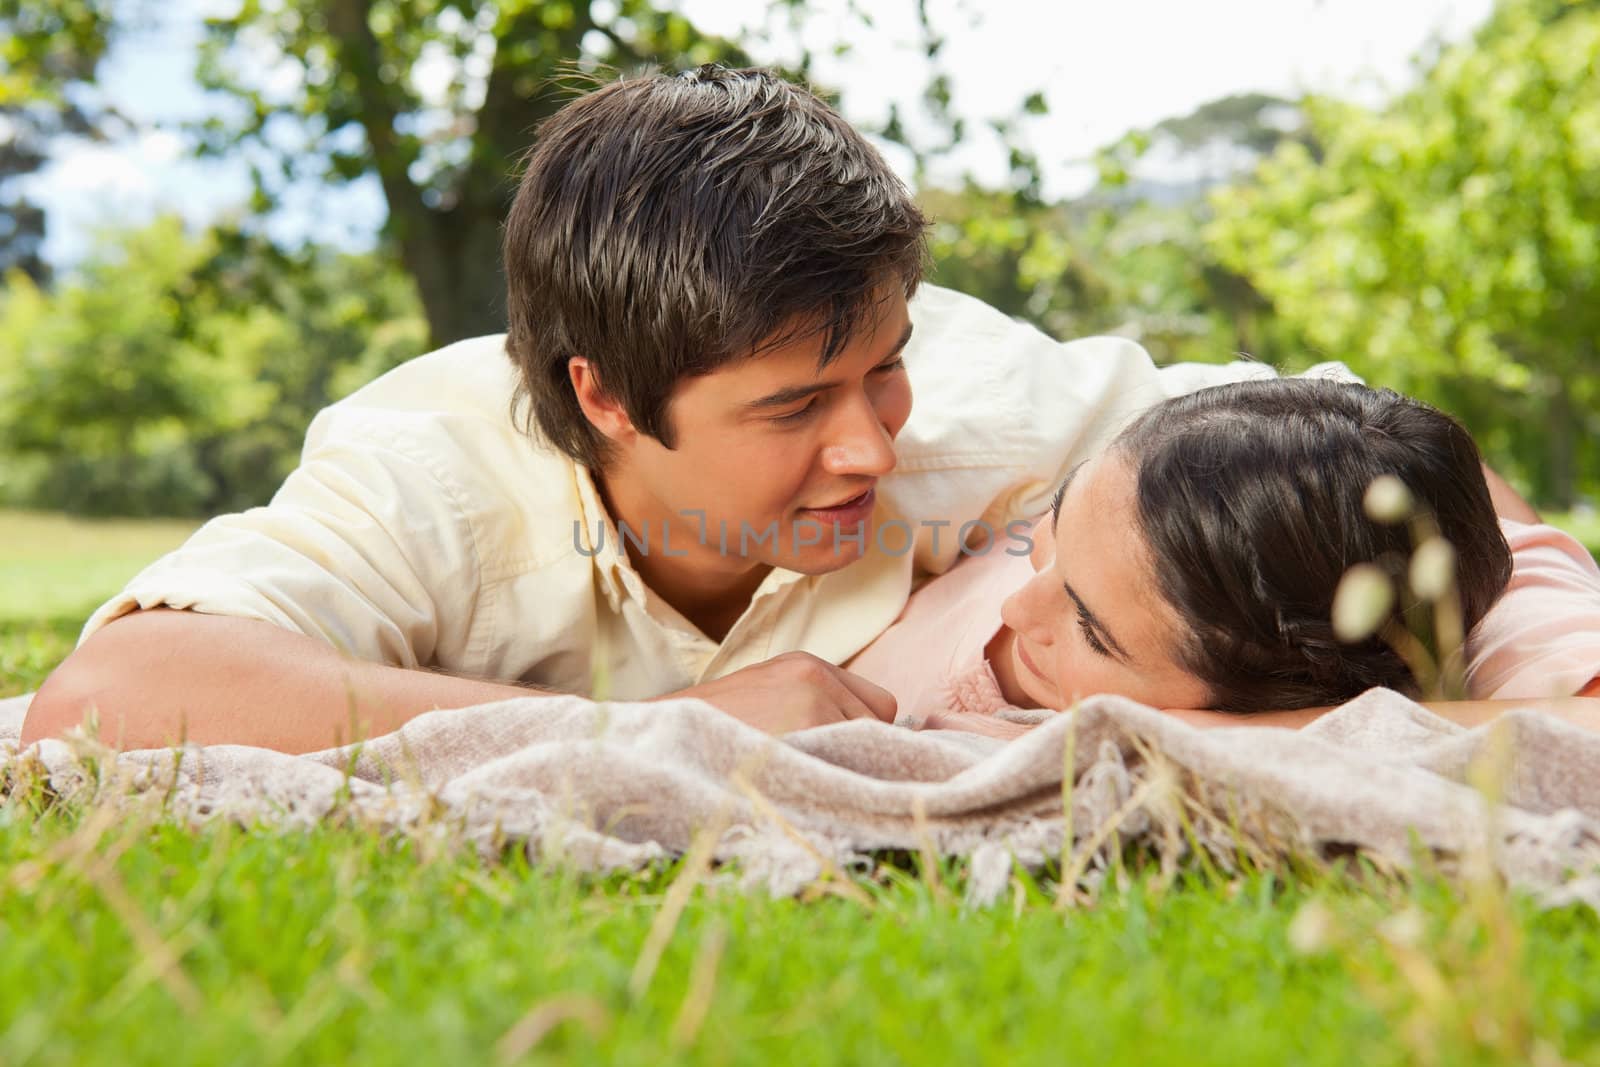 Man and a woman looking into each others eyes while lying prone on a grey blanket in the grass